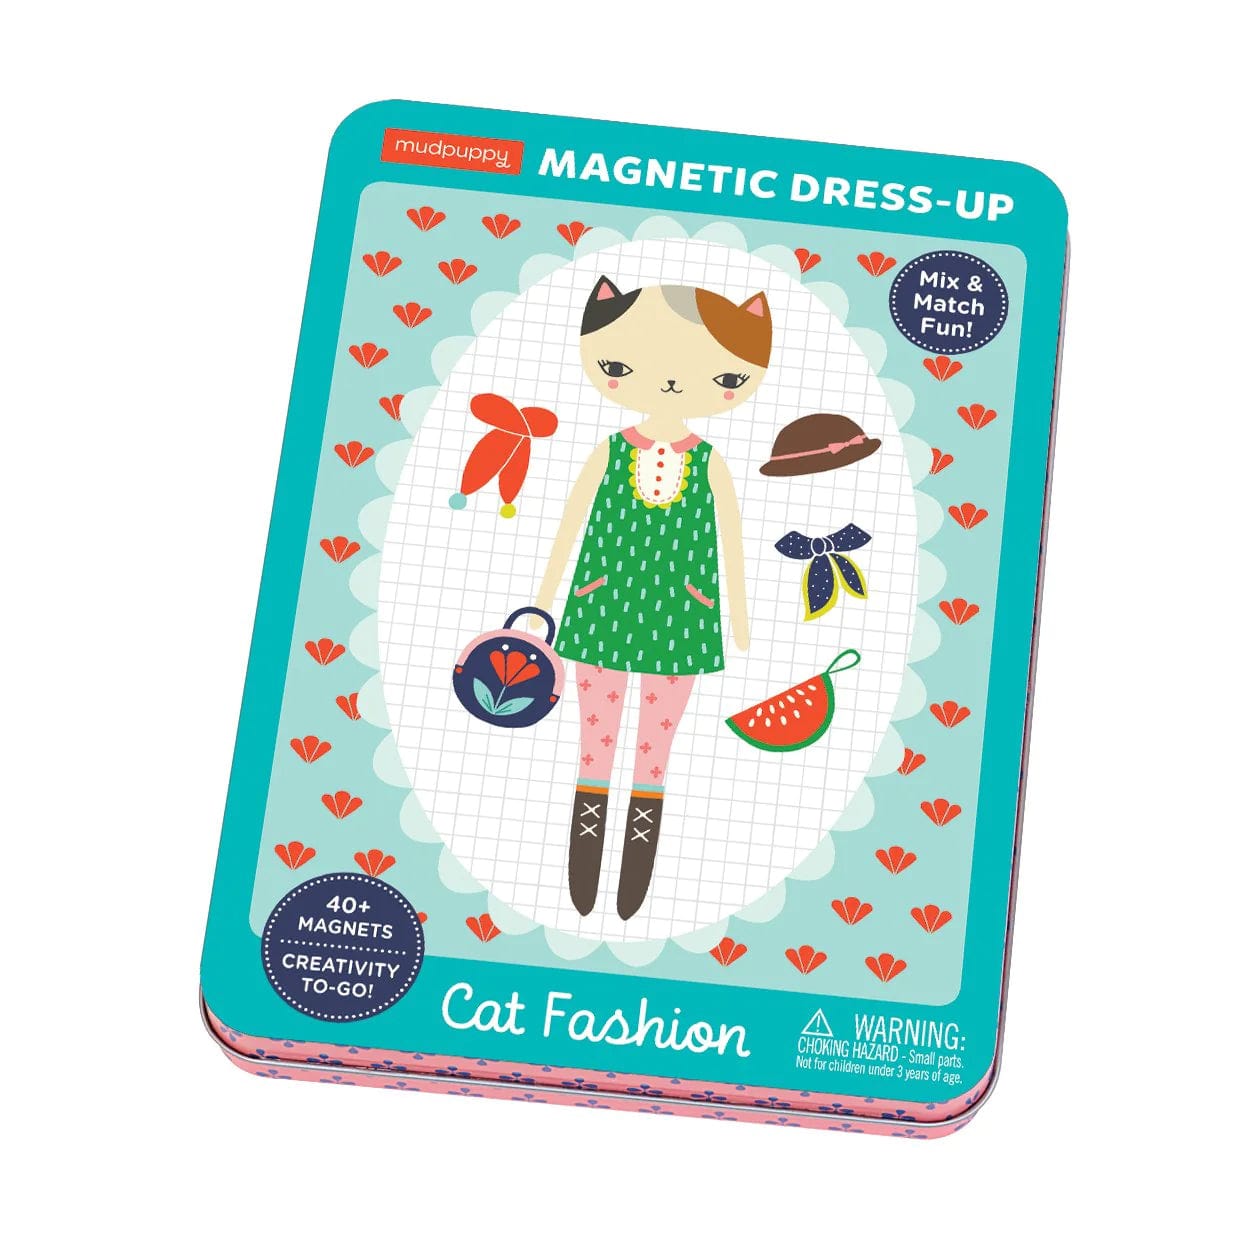 Kitty Cat Magnet Dress Up Toy